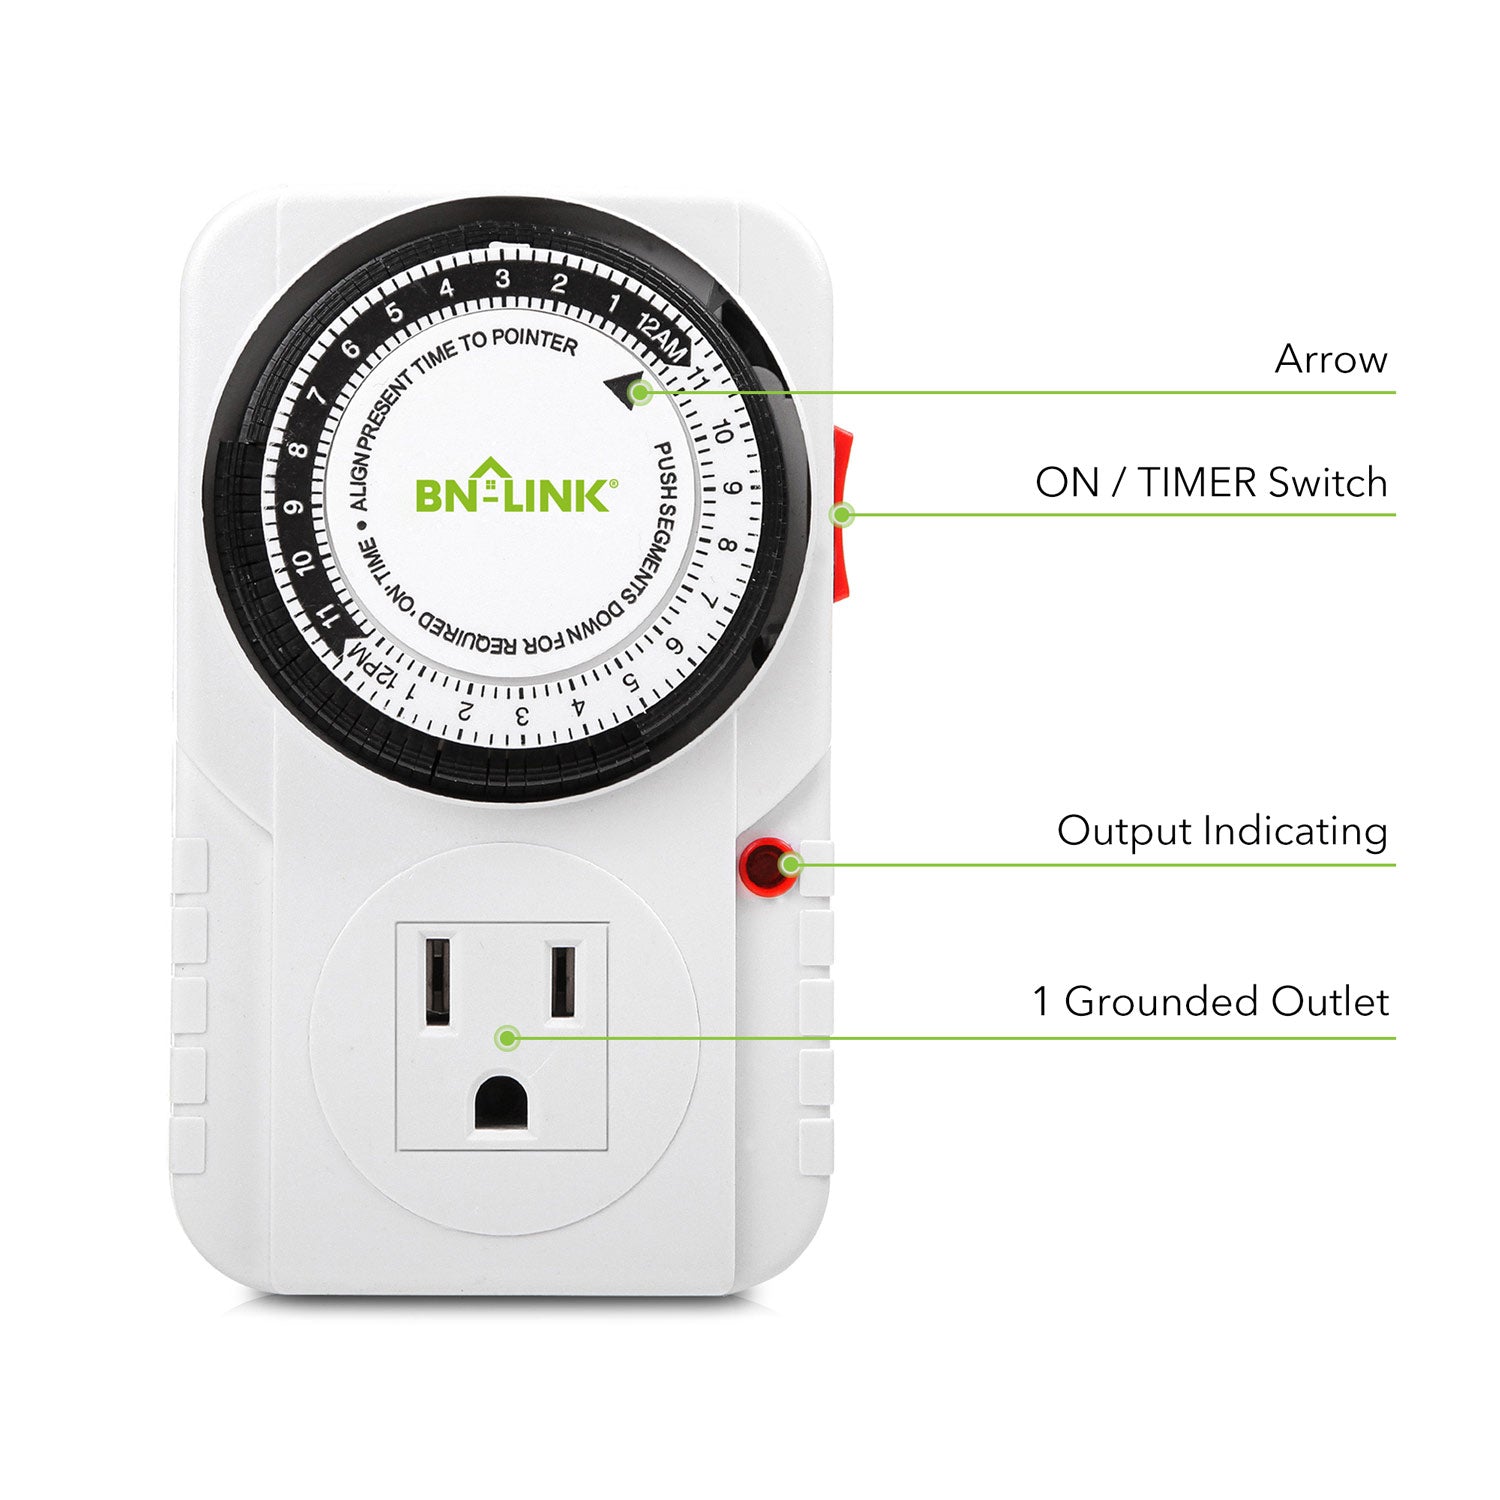 24 Hour Plug-in Mechanical Timer Grounded BN-LINK